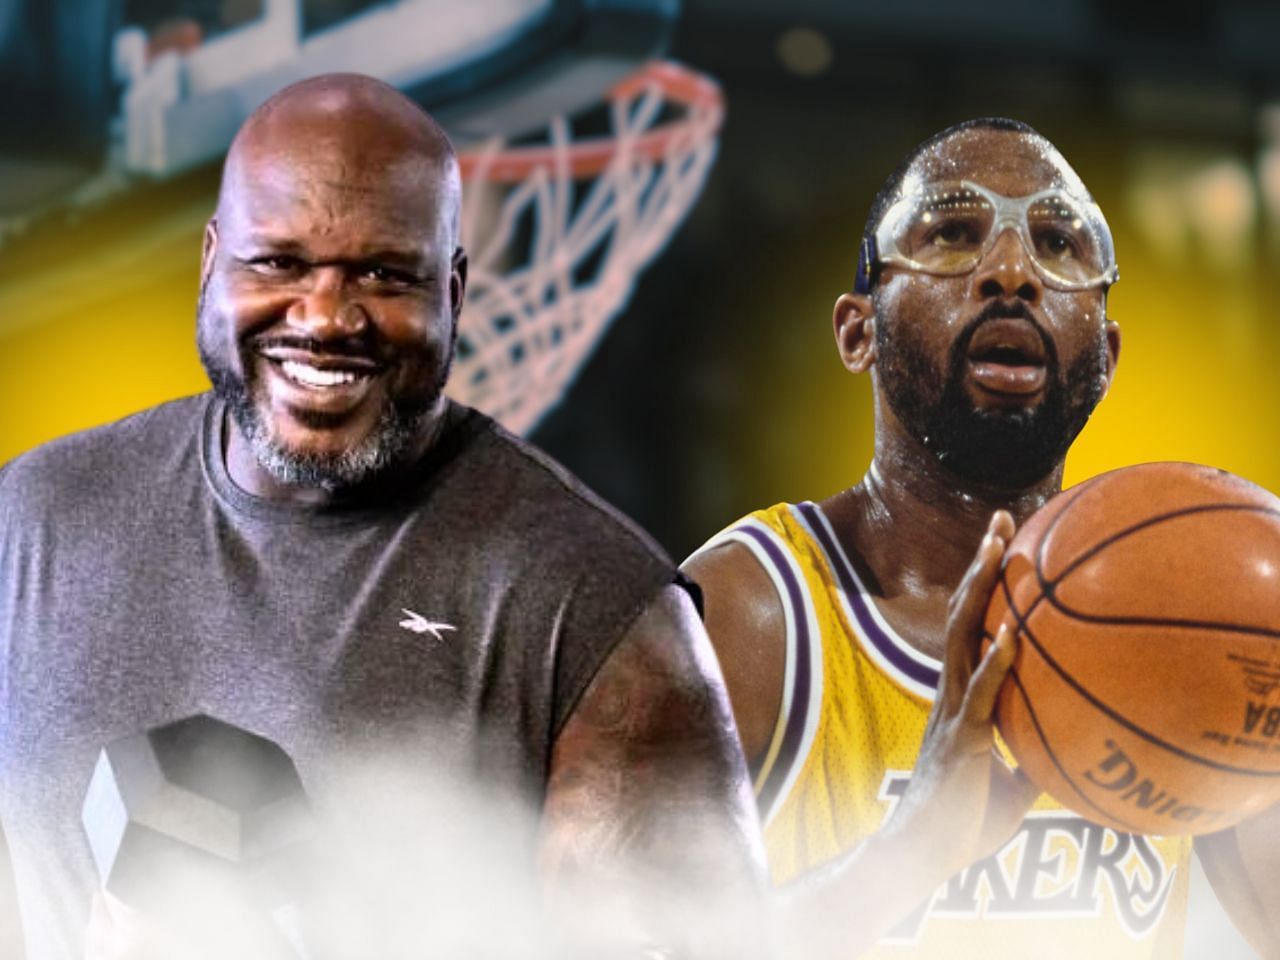 James Worthy speculates reason for Shaquille O